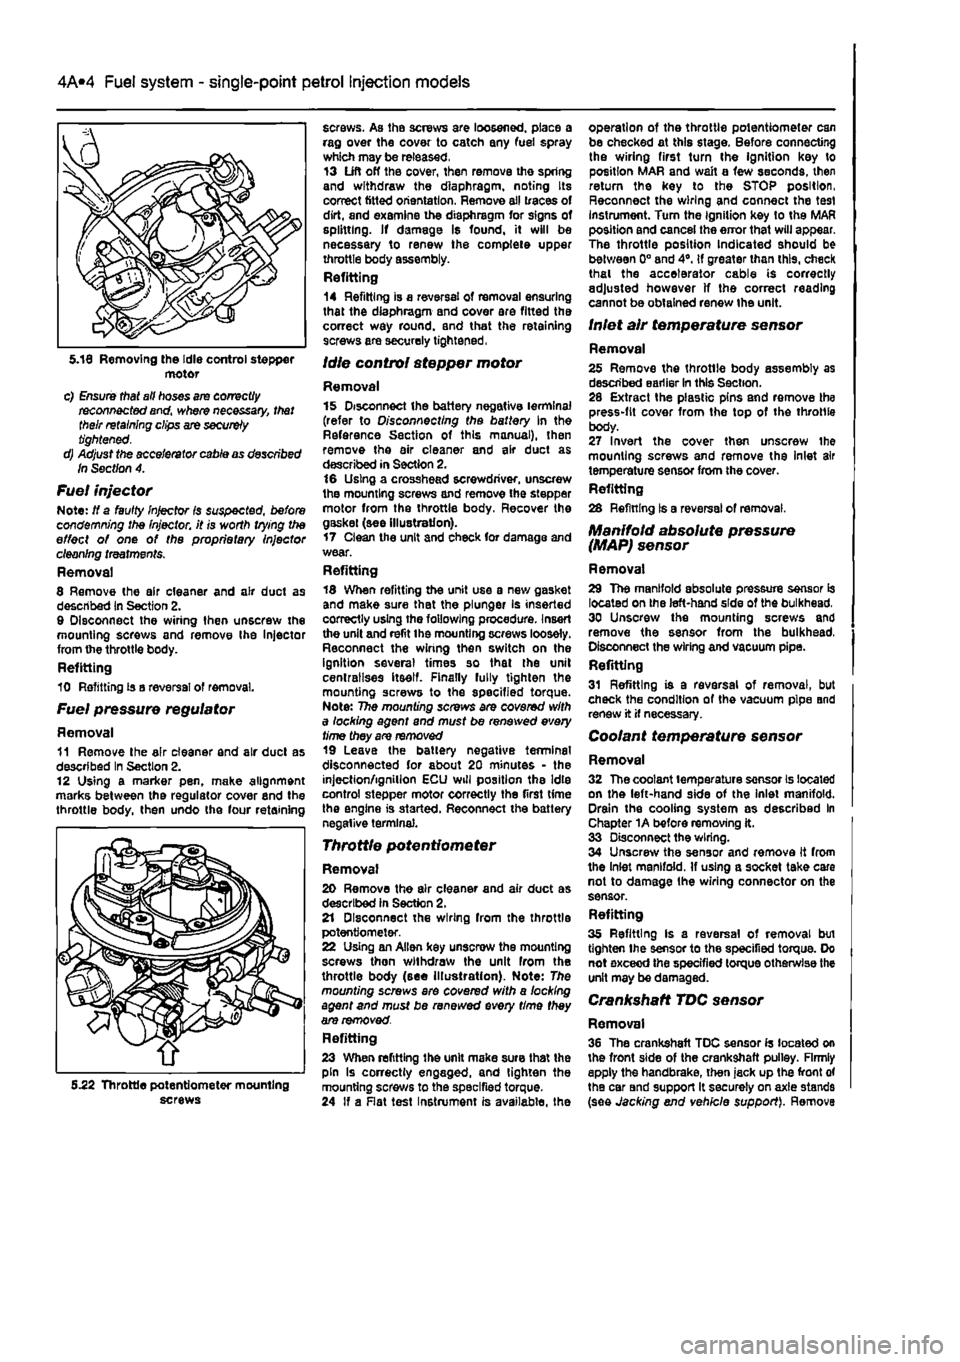 FIAT PUNTO 1999 176 / 1.G User Guide 
4A*2 Fuel system - single-point petrol Injection models 
motor c) Ensure that all hoses are correctly reconnected and, where necessary, that their retaining clips are securely tightened. d) Adjust th